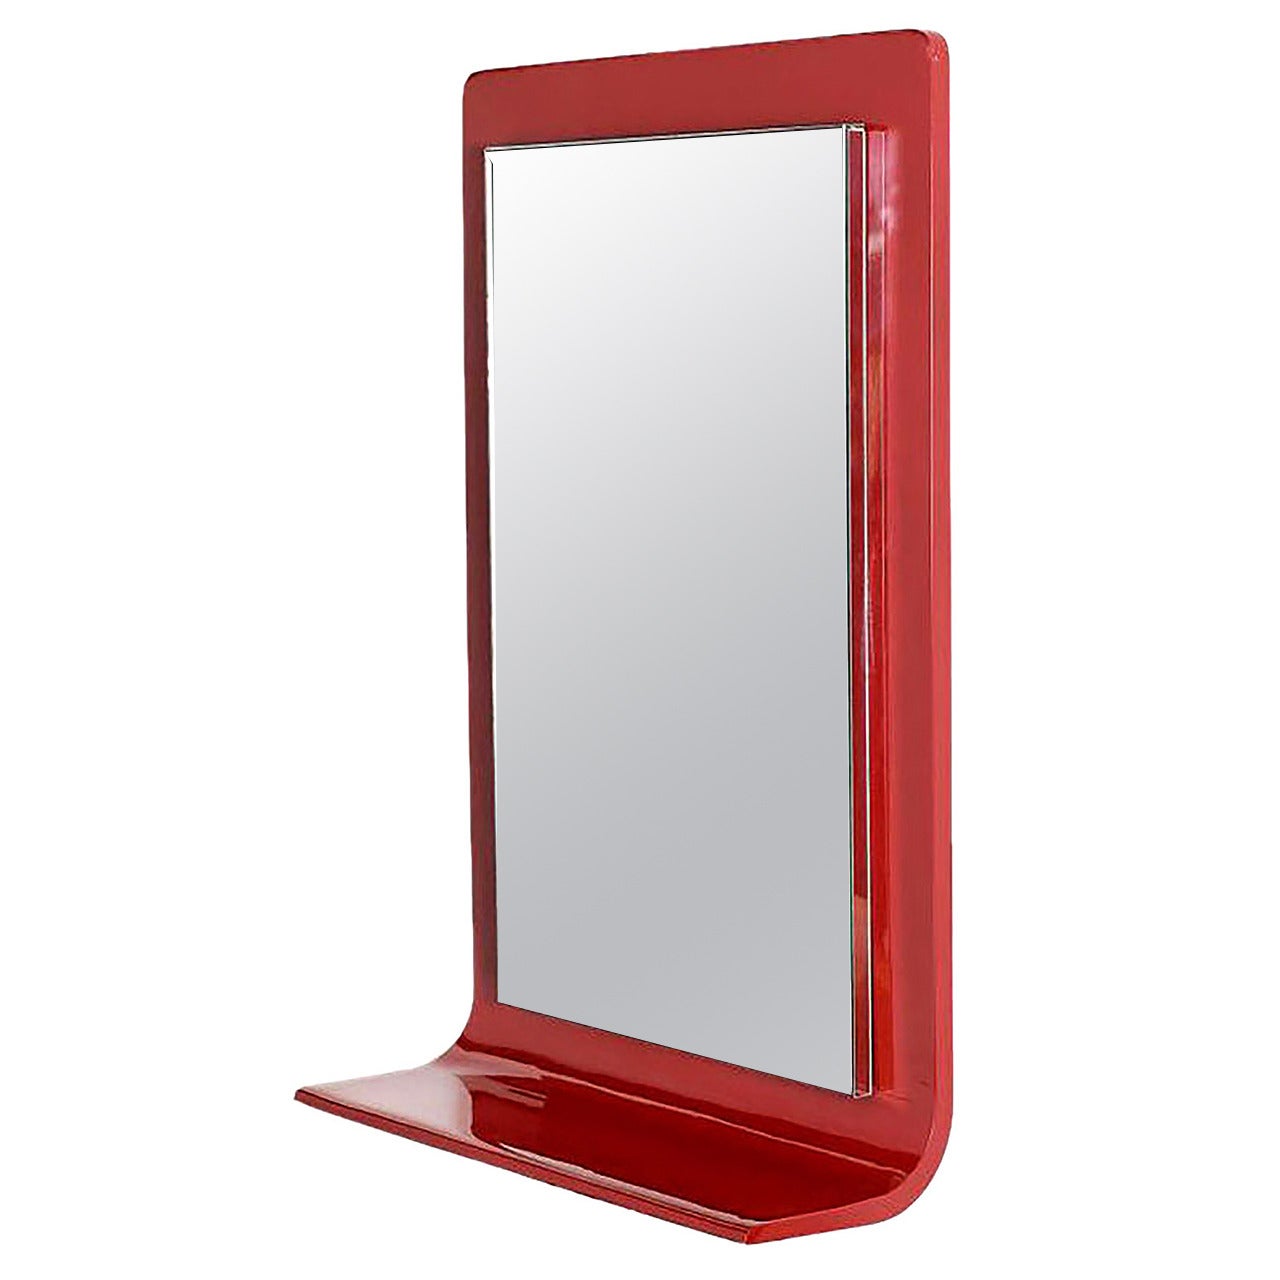 Gampel-Stoll Red Lacquered Wall Mirror with Integral Console